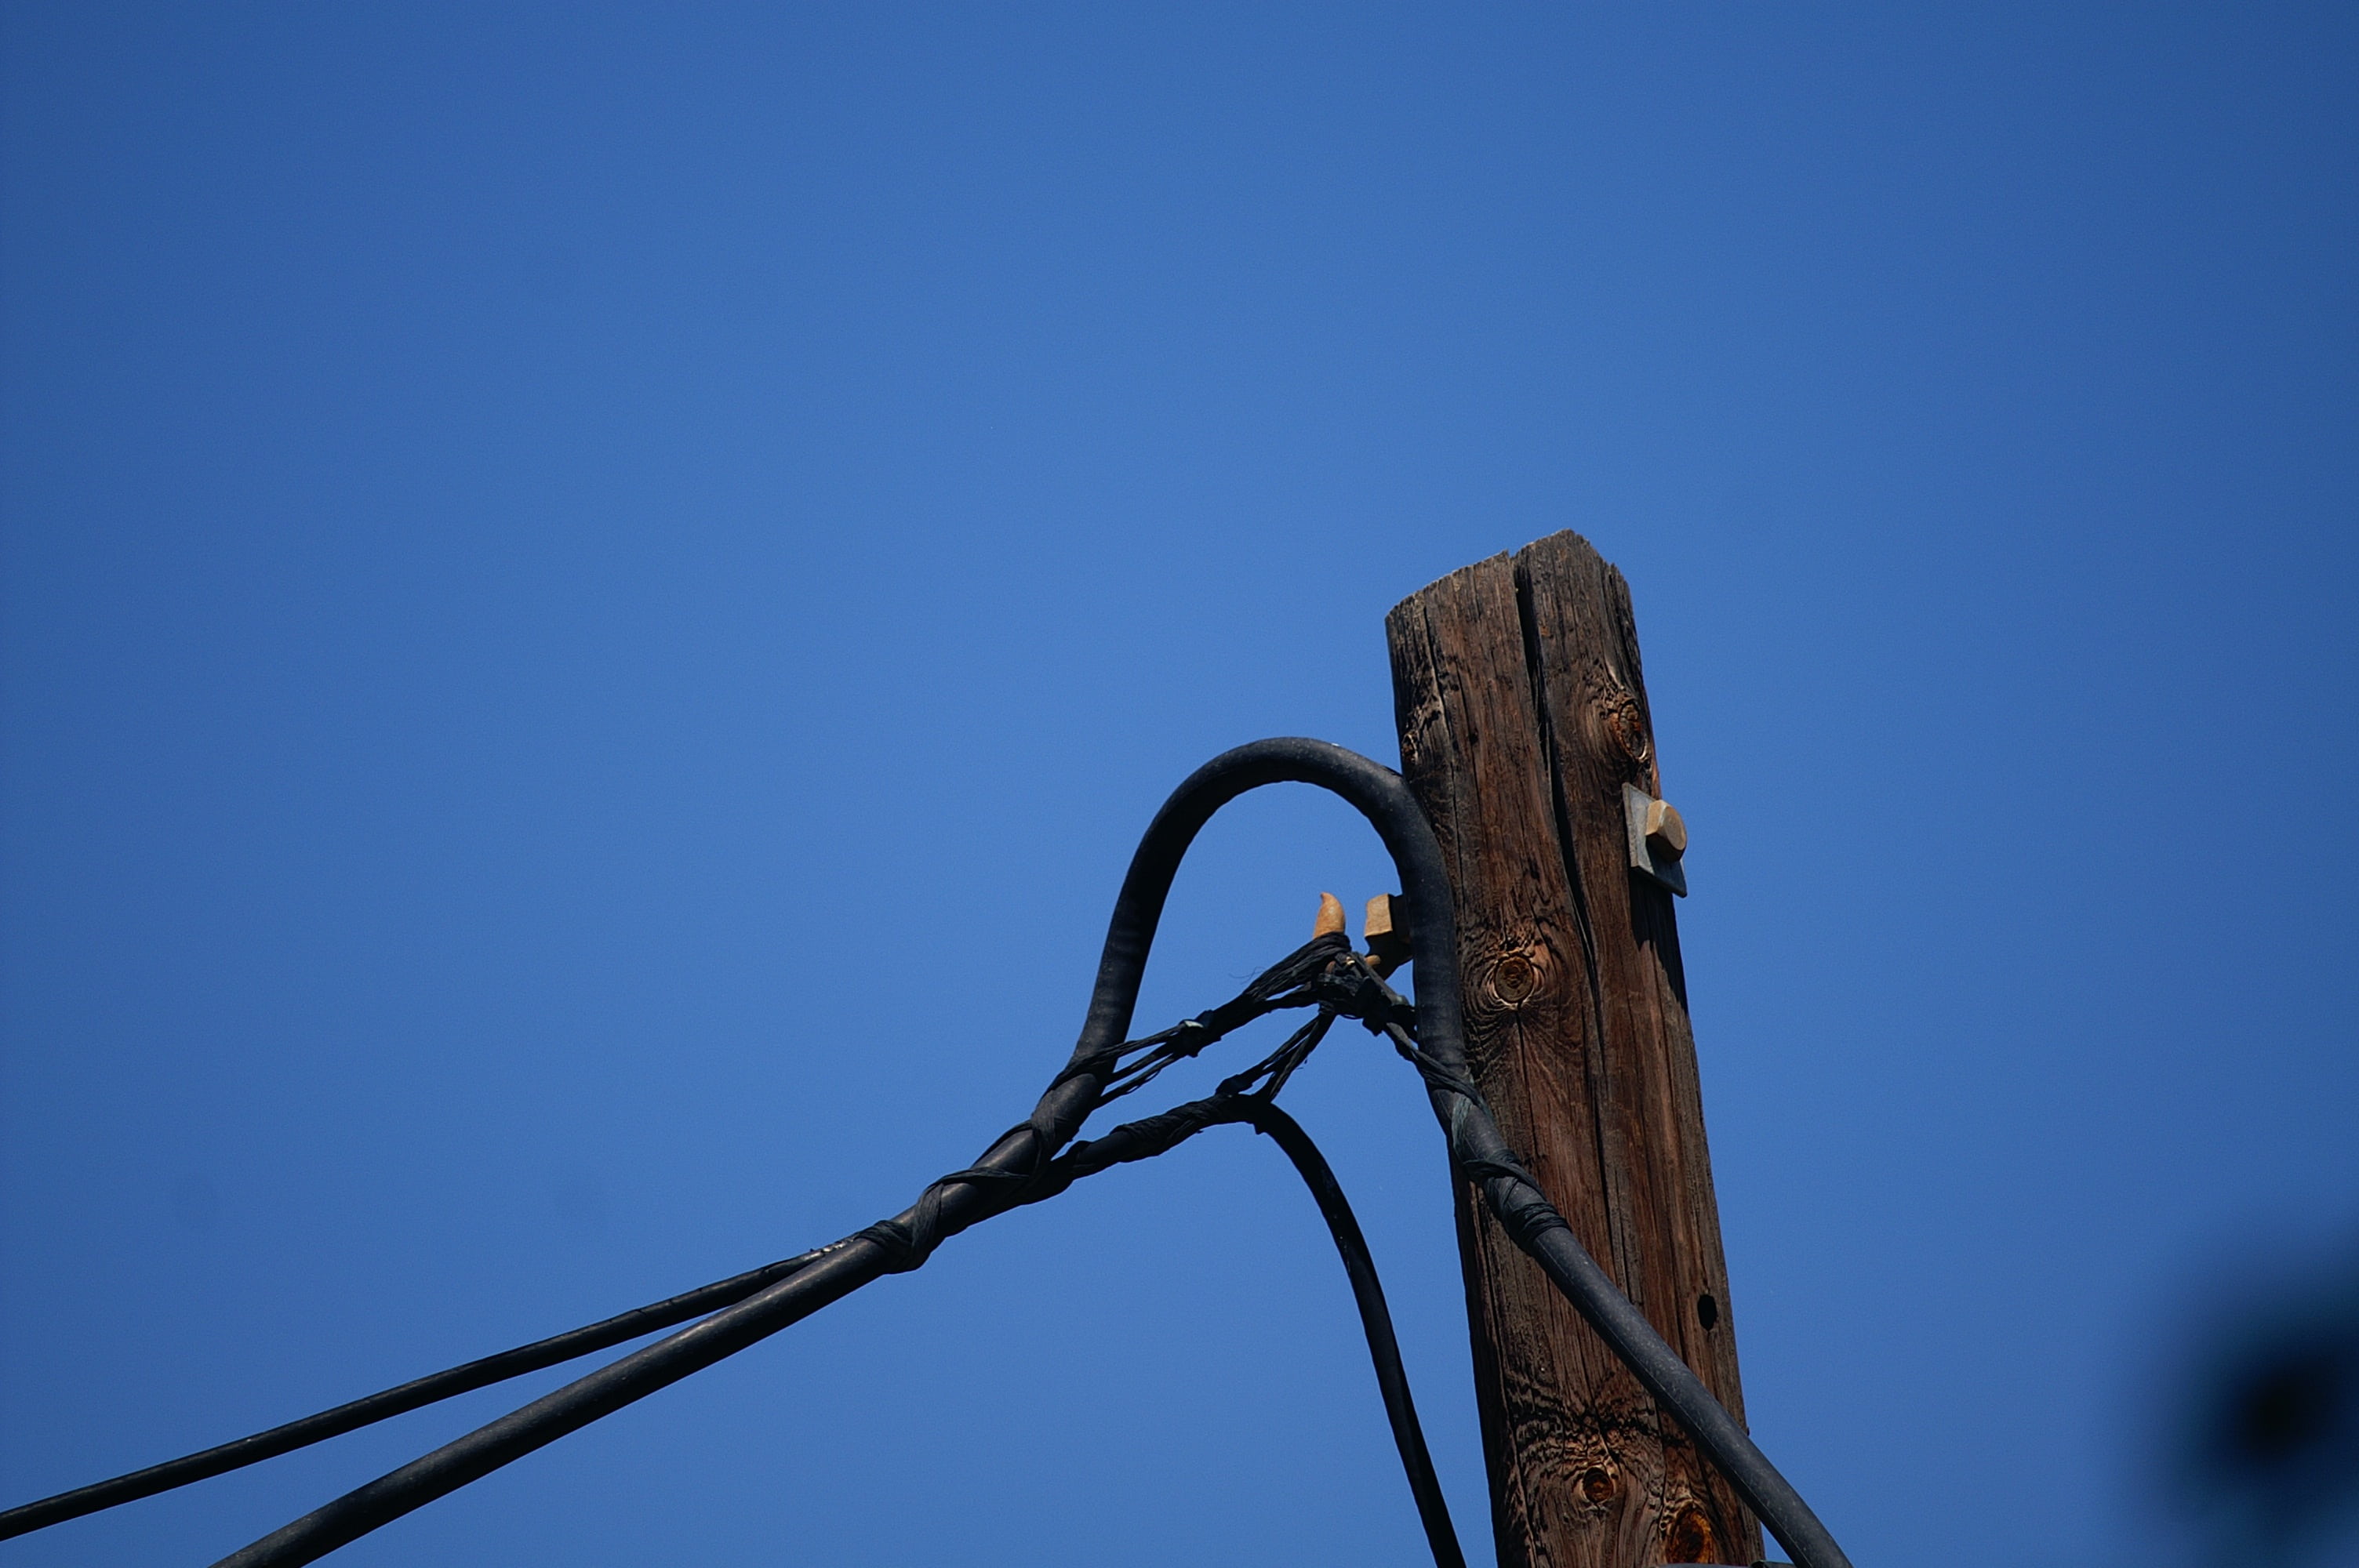 cables, column, brown, blue, heaven, wires, noose, sky, clear sky